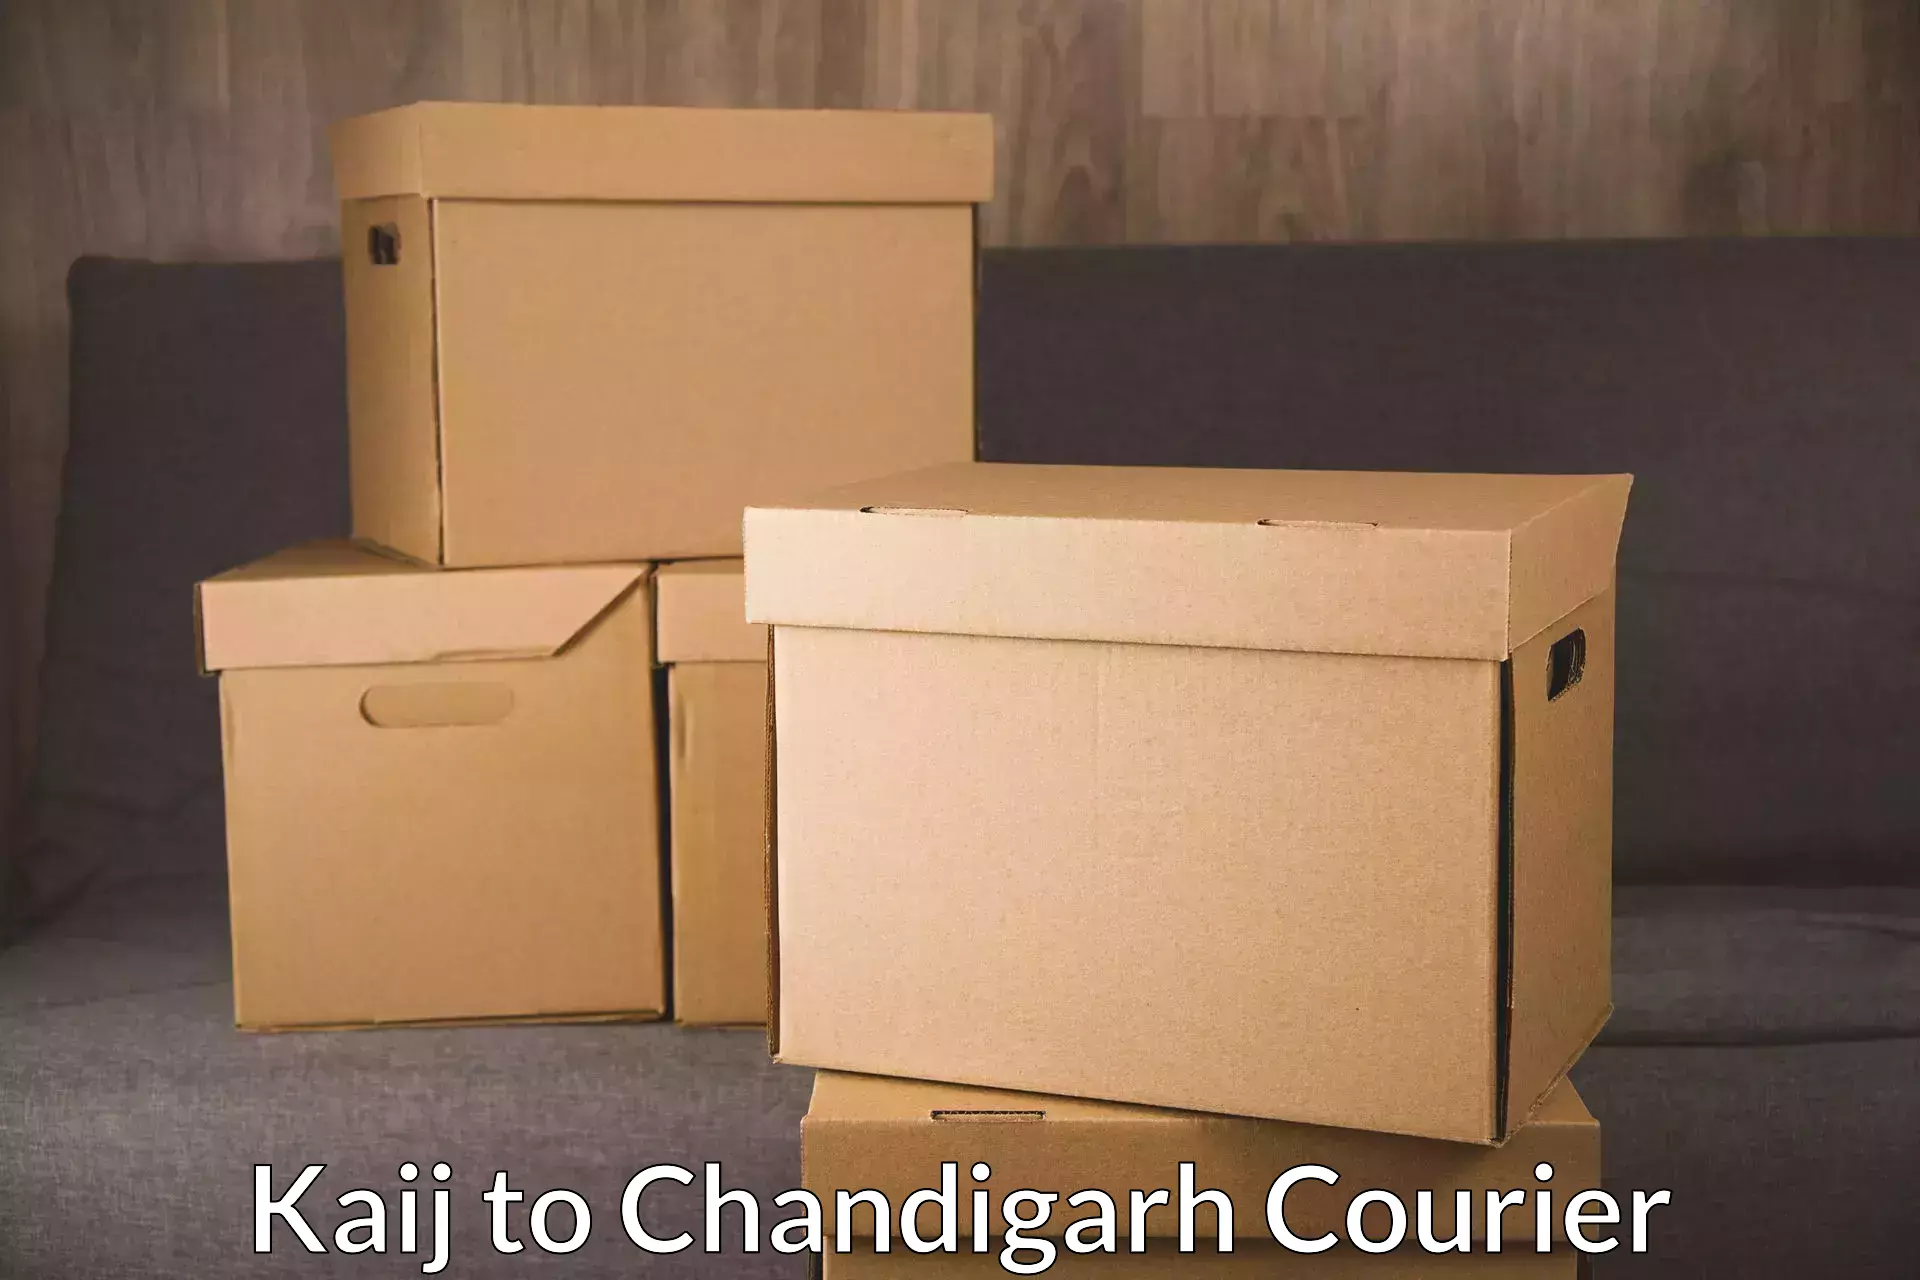 Multi-national courier services Kaij to Chandigarh